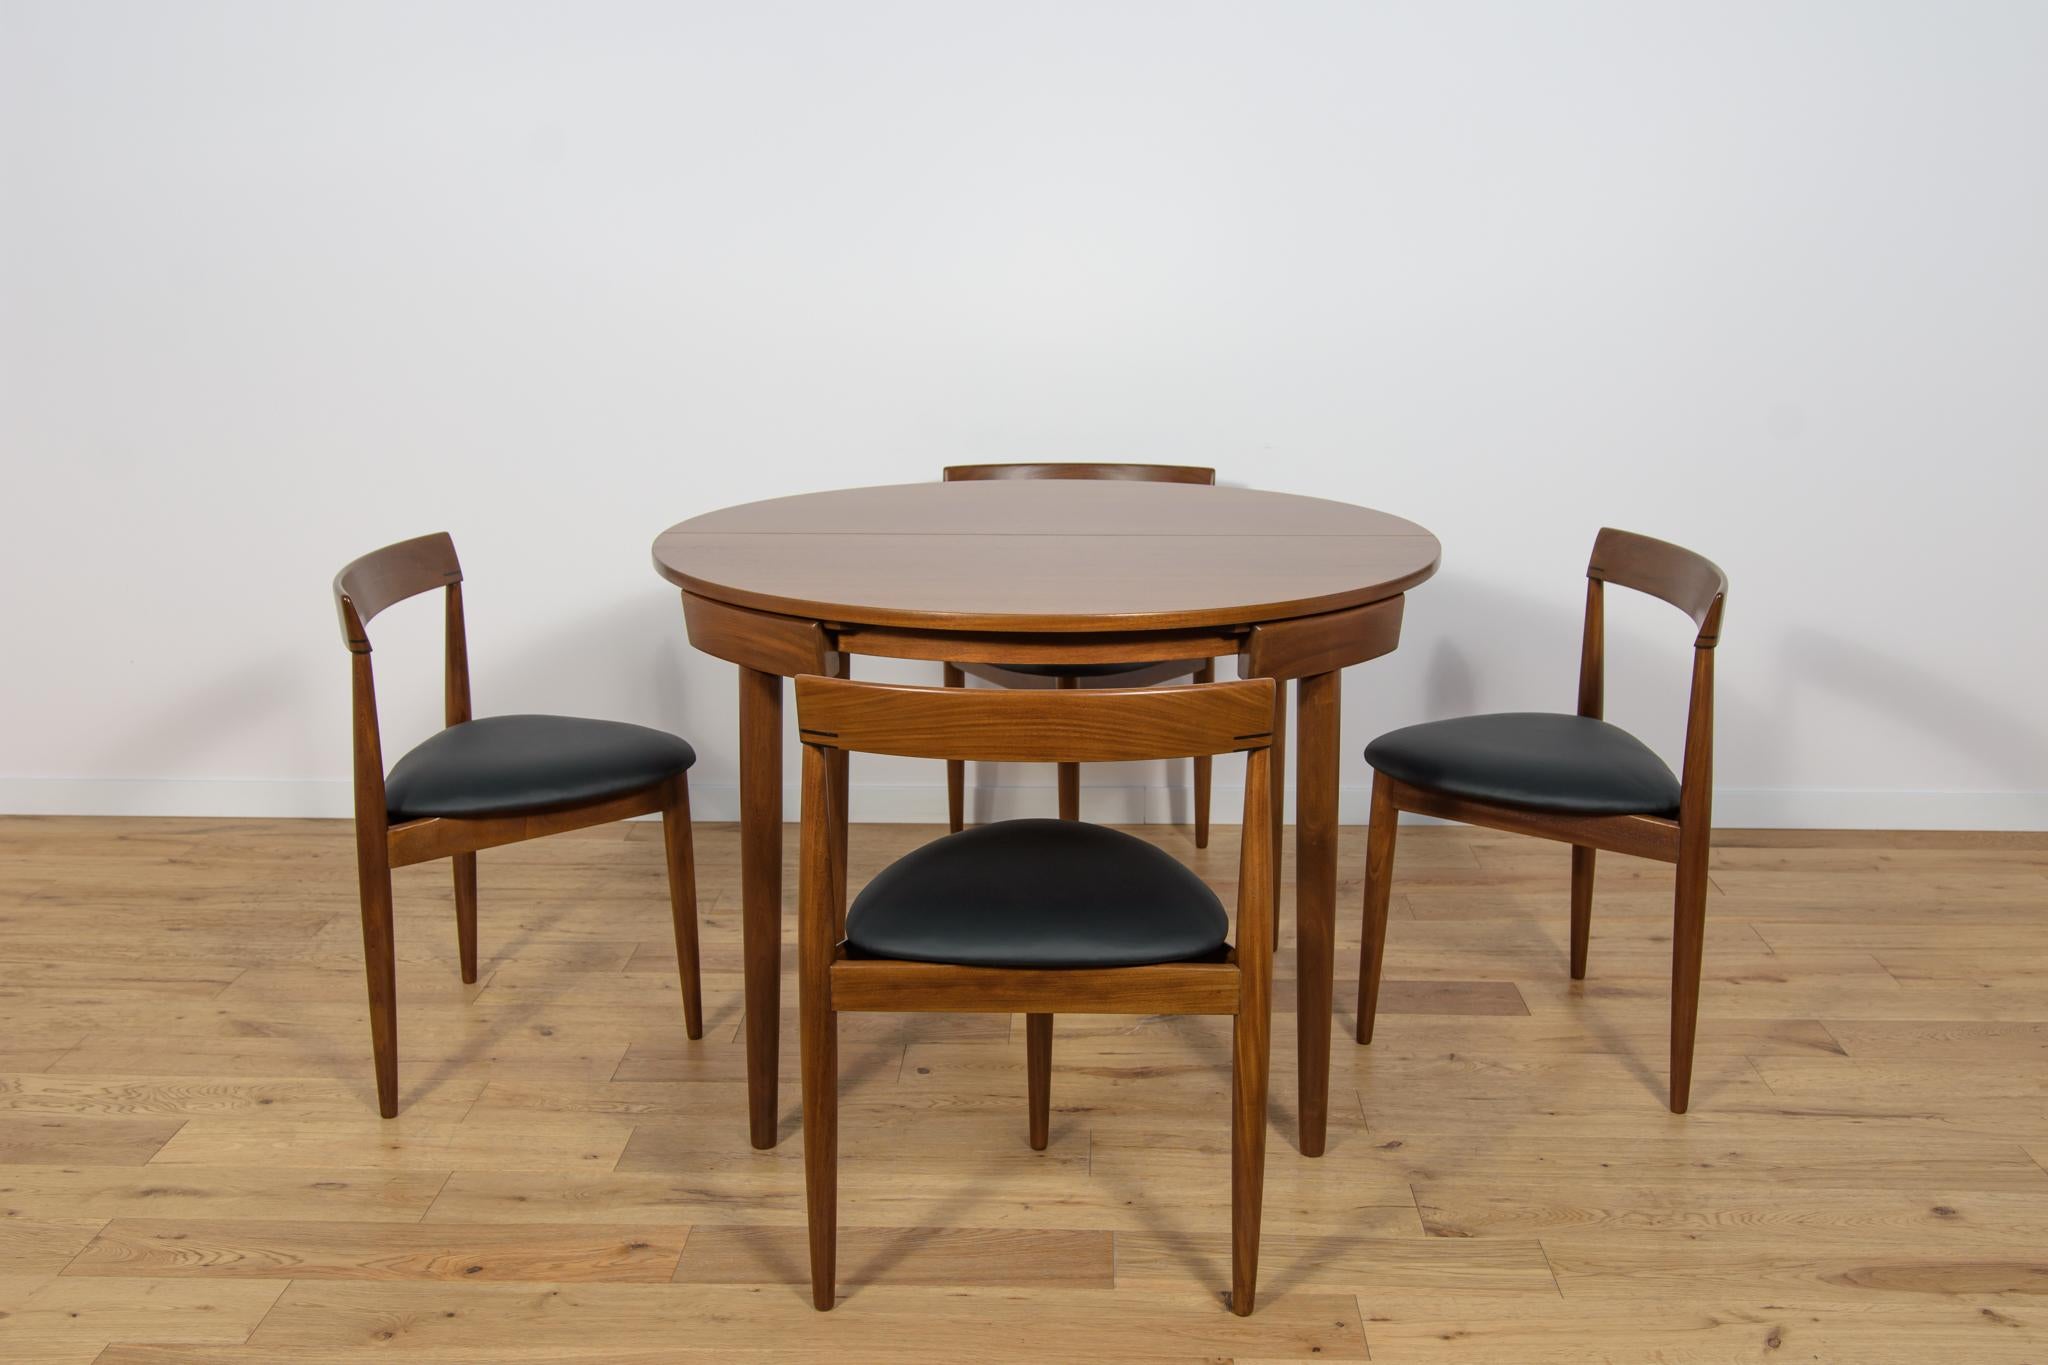 Danish  Mid-Century Teak Dining Table and Chairs Set by Hans Olsen for Frem Røjle. For Sale